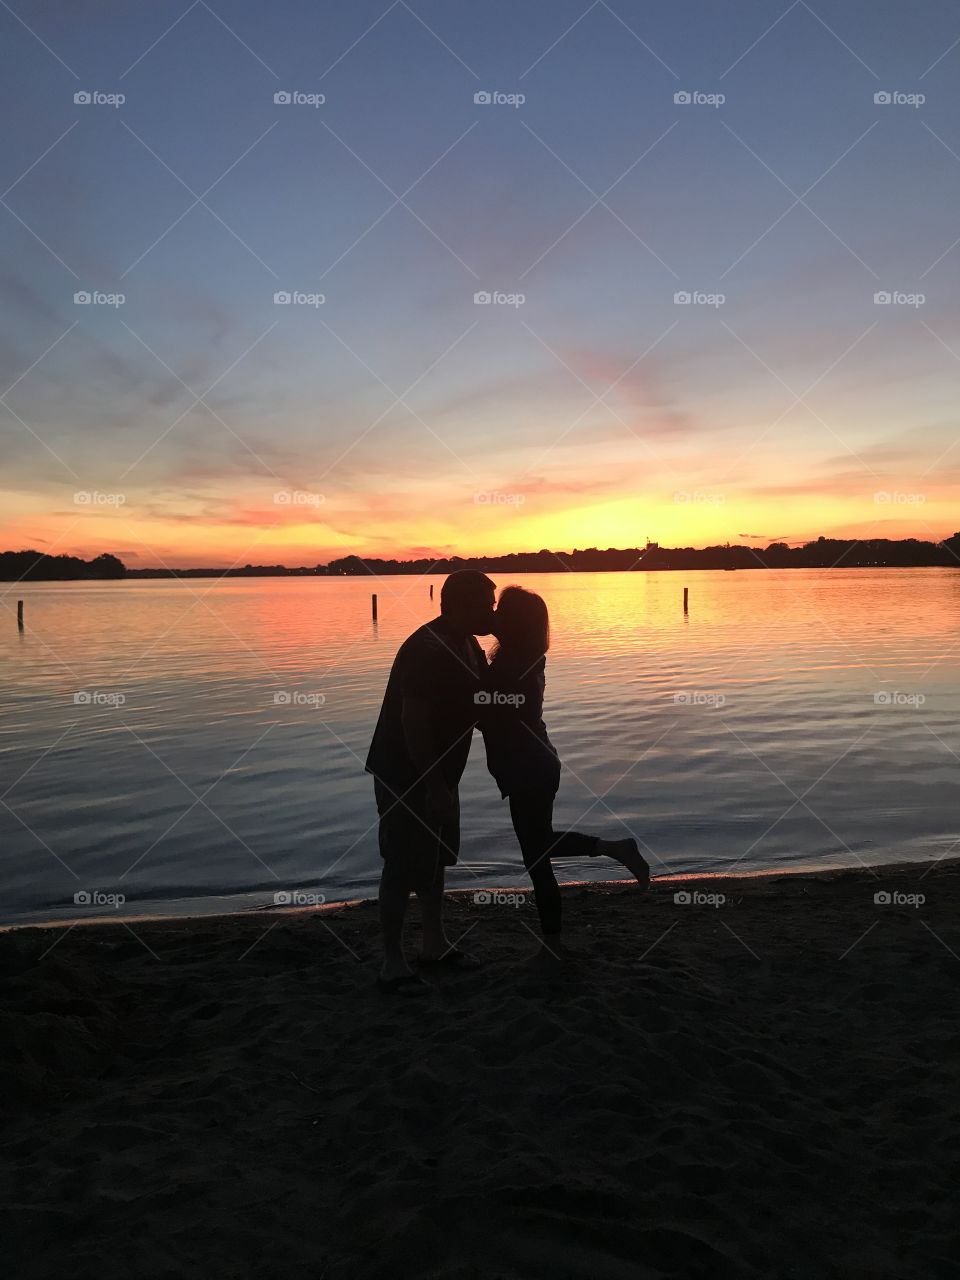 Gorgeous night sky in background and couple silhouetted kissing by the lake! 